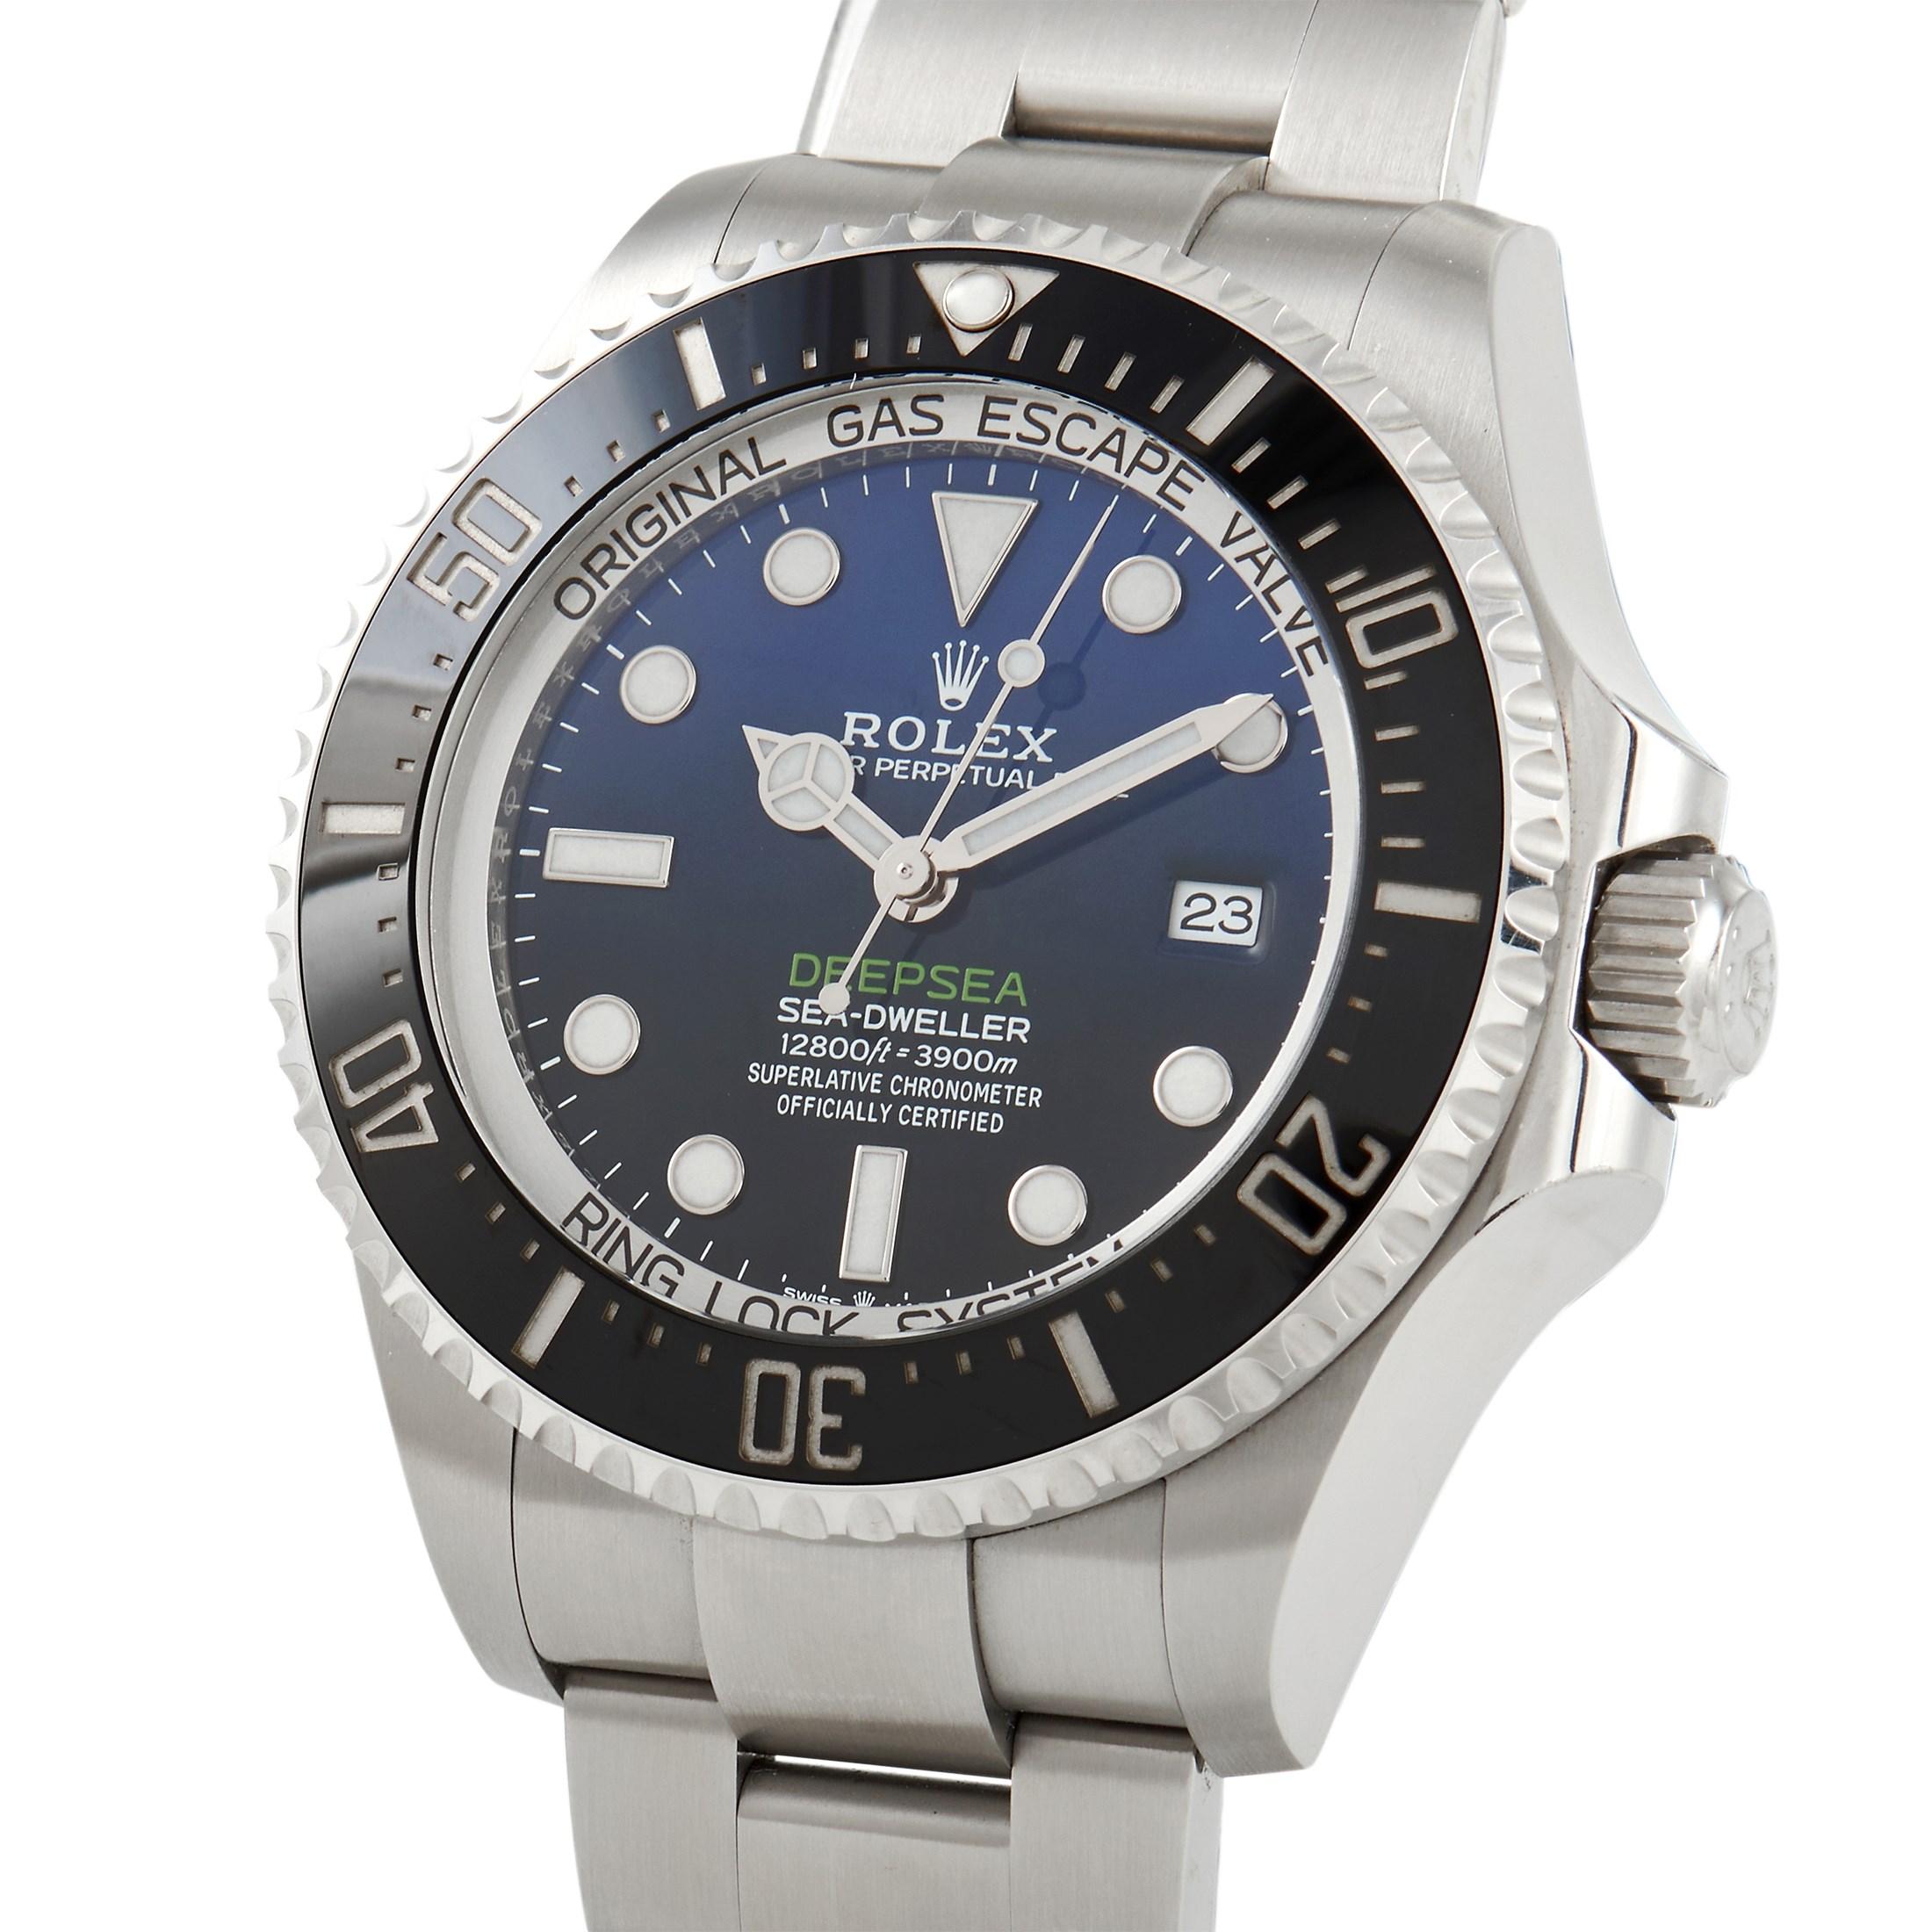 Meant for deep-sea adventures, this diver's watch is your best companion for your mission. The Rolex Sea-Dweller Deepsea D-Blue Dial Watch 126660 features a 44mm Oystersteel case with Monobloc middle case and a screw-down case back and crown. The